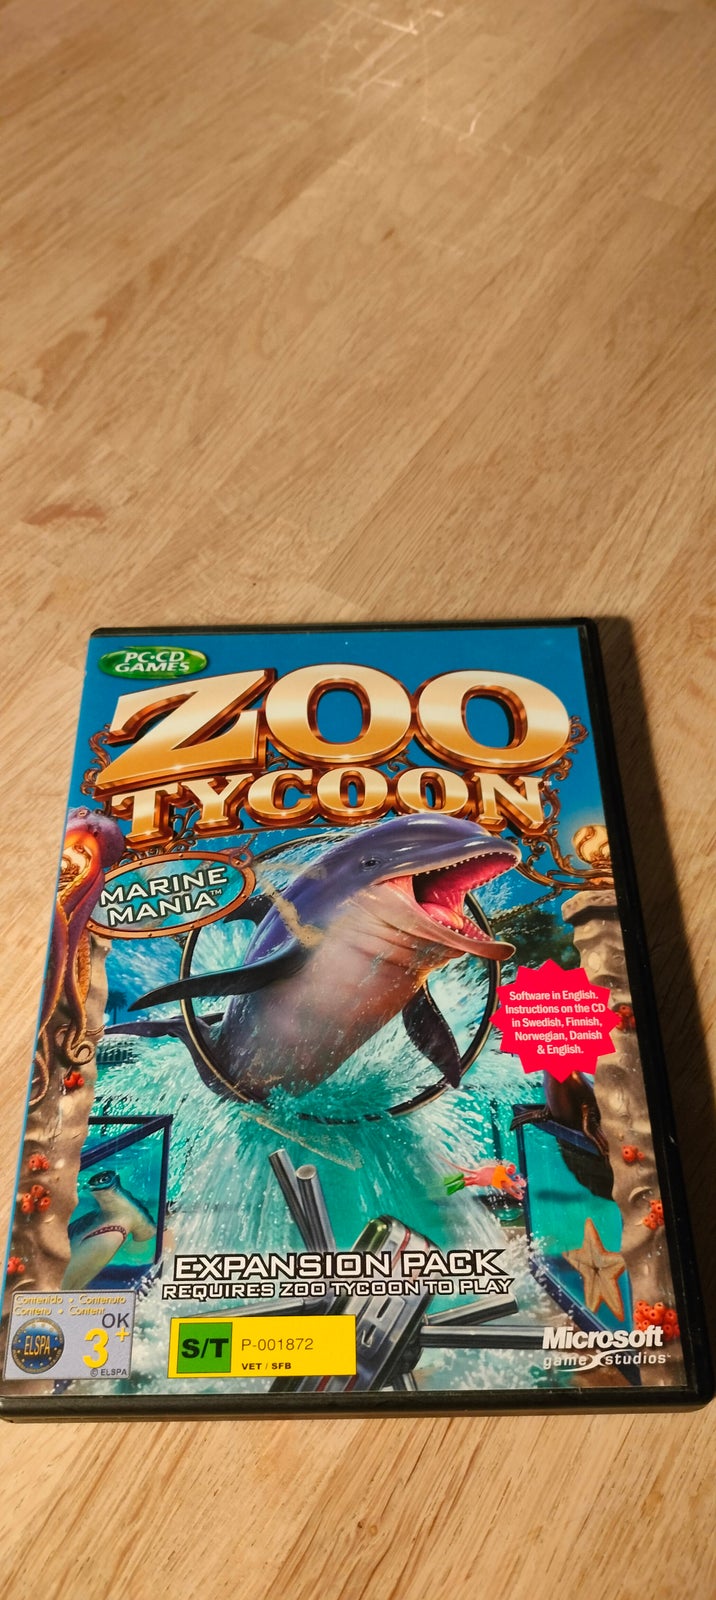 ZOO TYCOON Marine Mania (Expansion Pack), til pc,